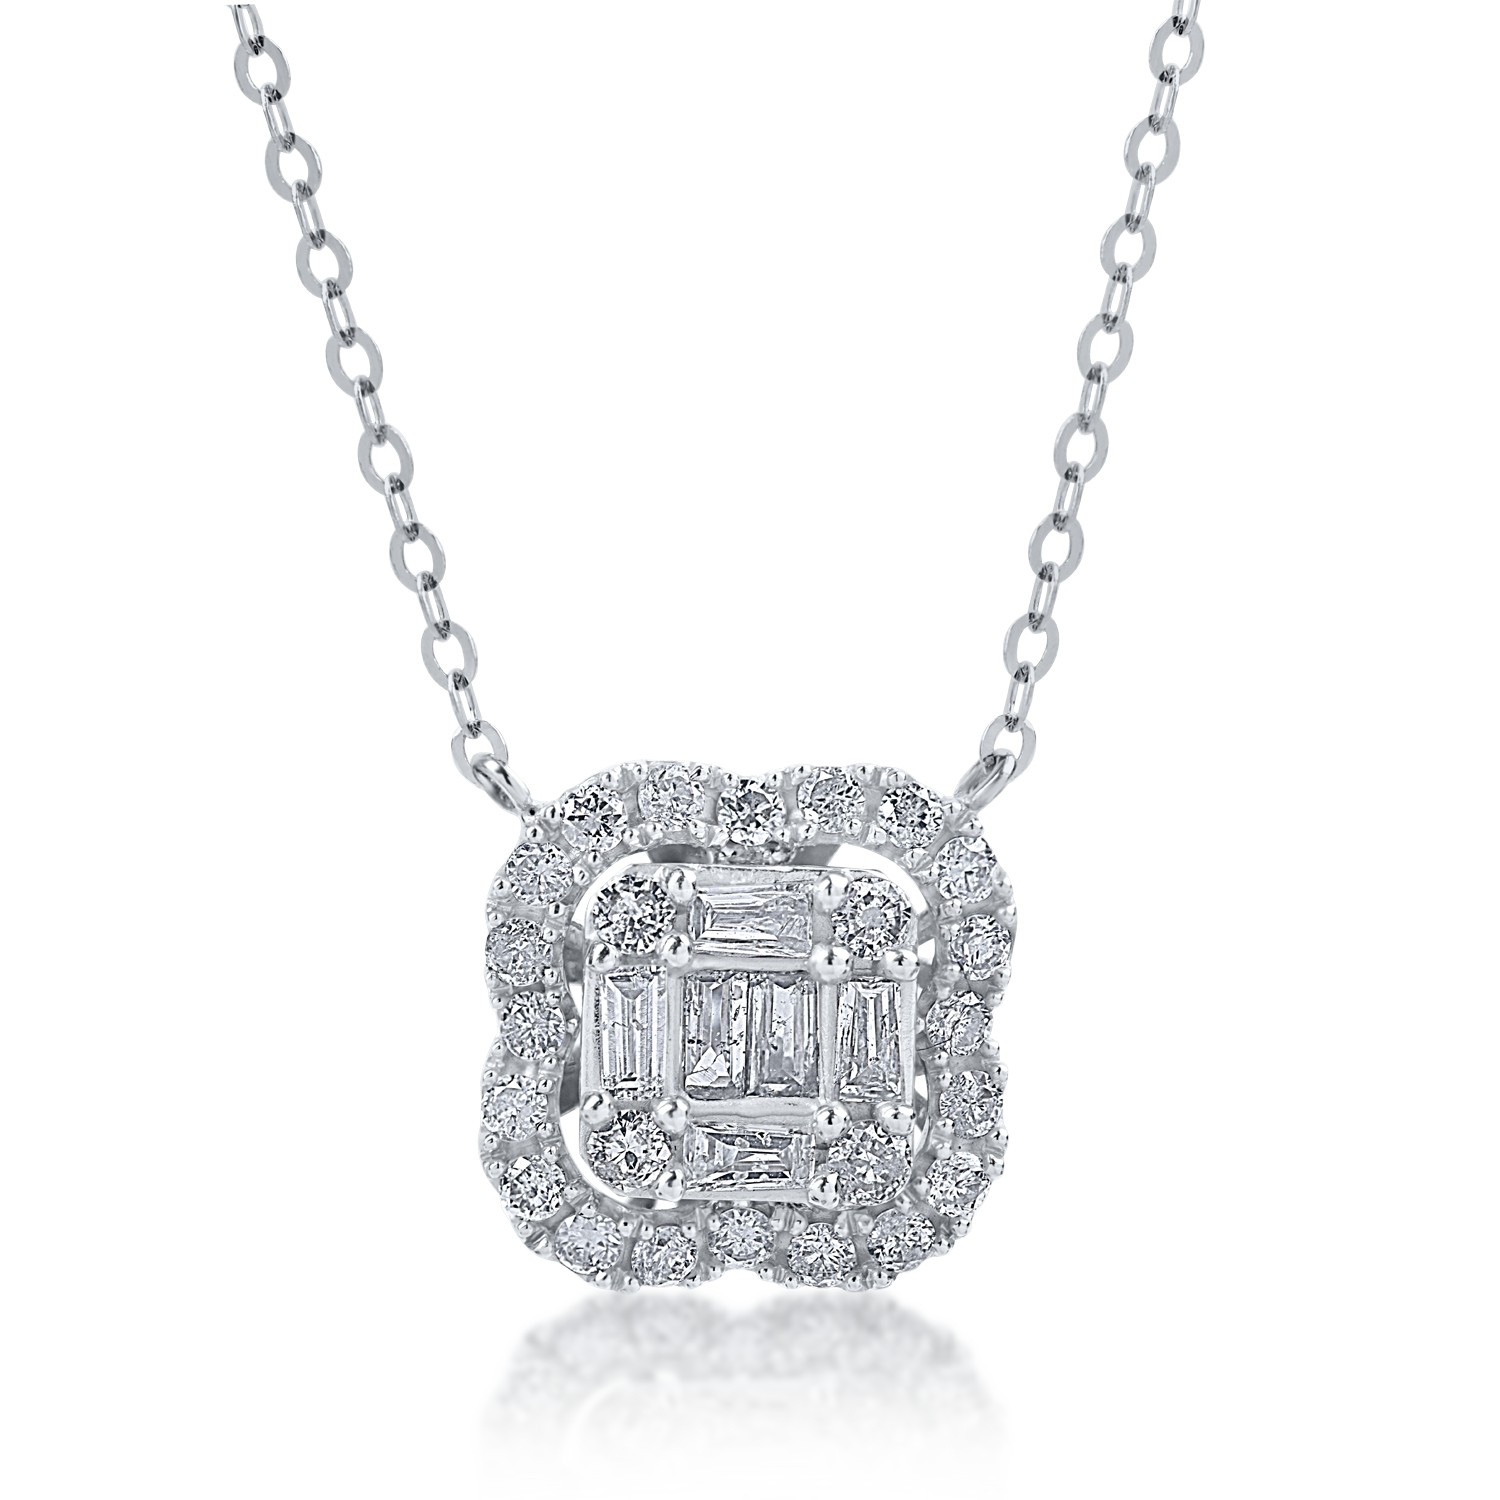 White gold pendant necklace with 0.42ct diamonds